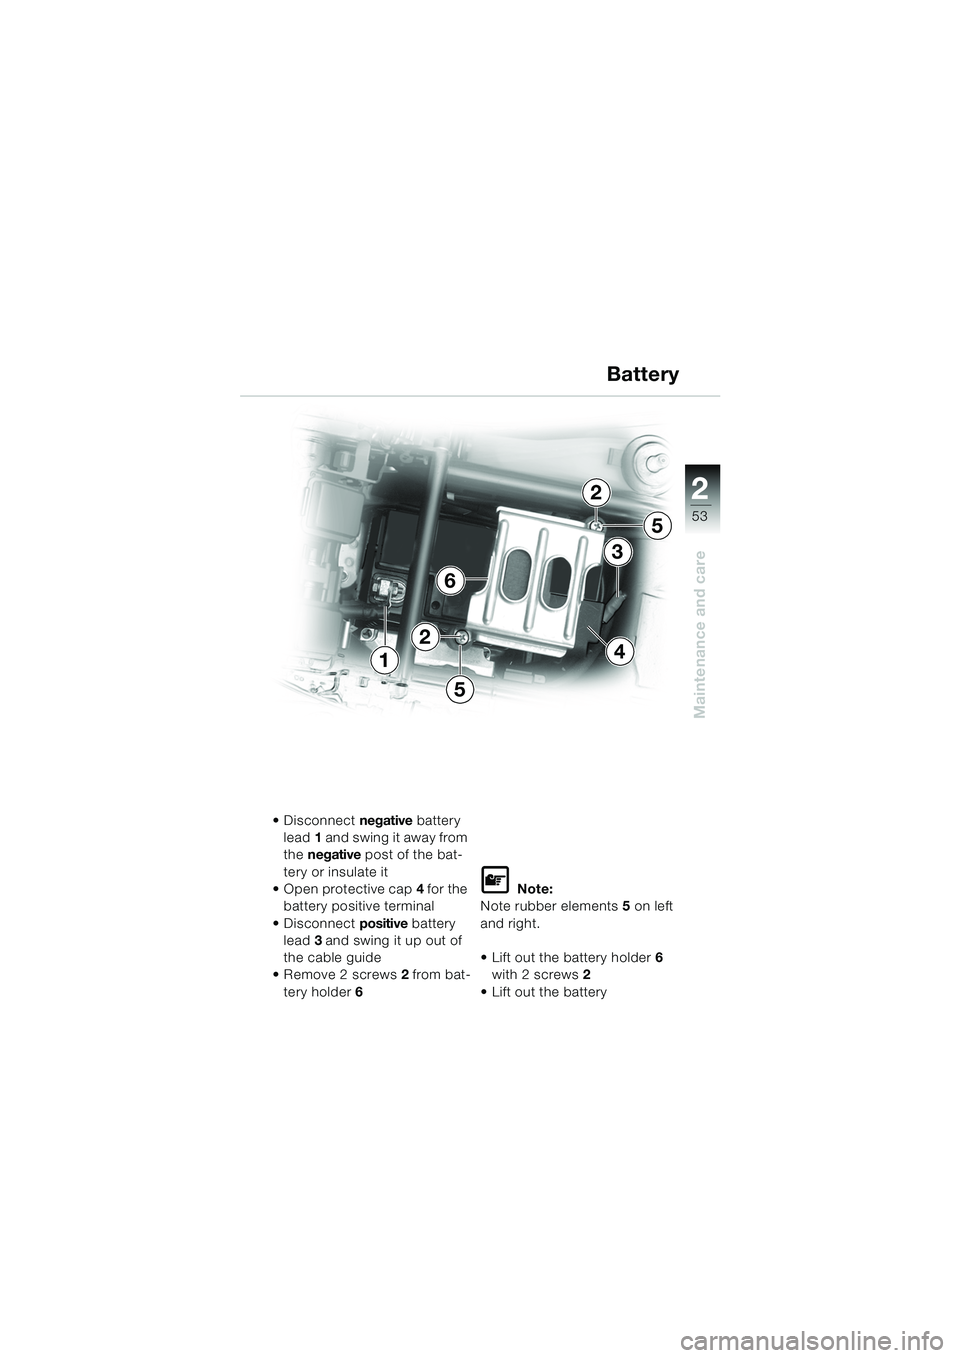 BMW MOTORRAD K 1200 RS 2004  Riders Manual (in English) 53
Maintenance and care
2
4
6
1
3
2
5
5
2
 Disconnect negative battery 
lead 1 and swing it away from 
the  negative  post of the bat-
tery or insulate it
 Open protective cap 4 for the 
battery pos